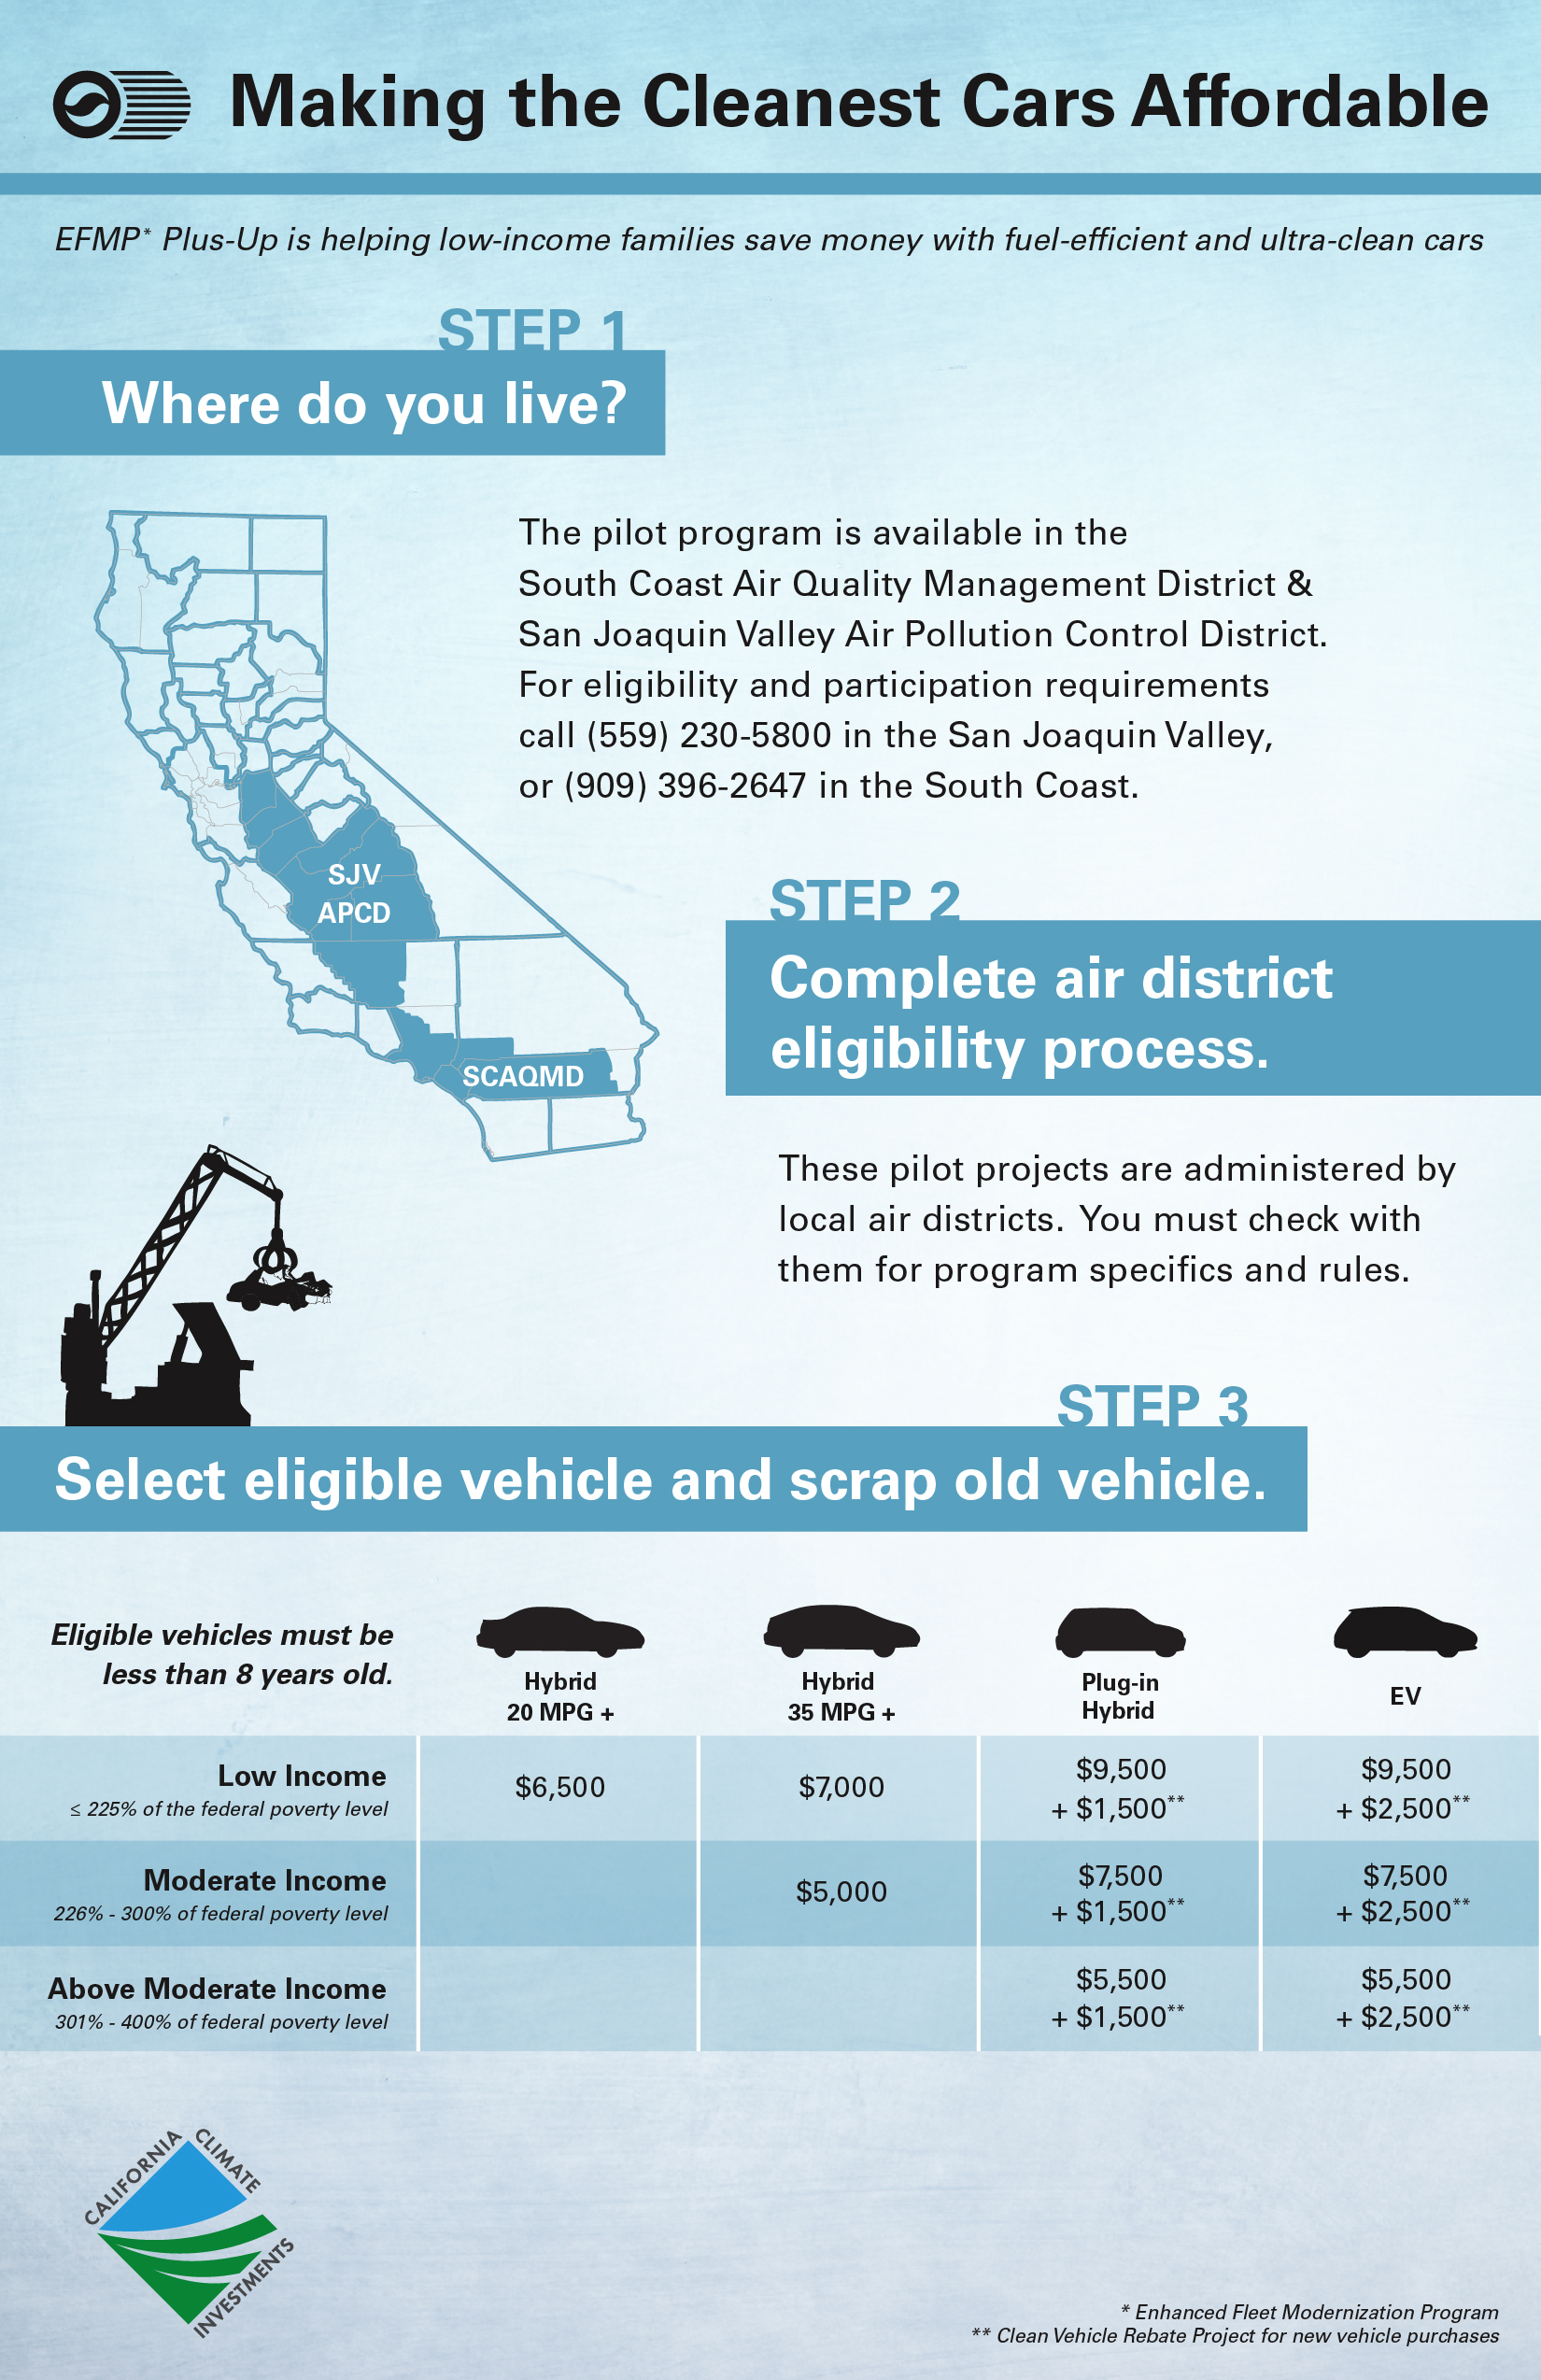 Making the Cleanest Cars Affordable Infographic